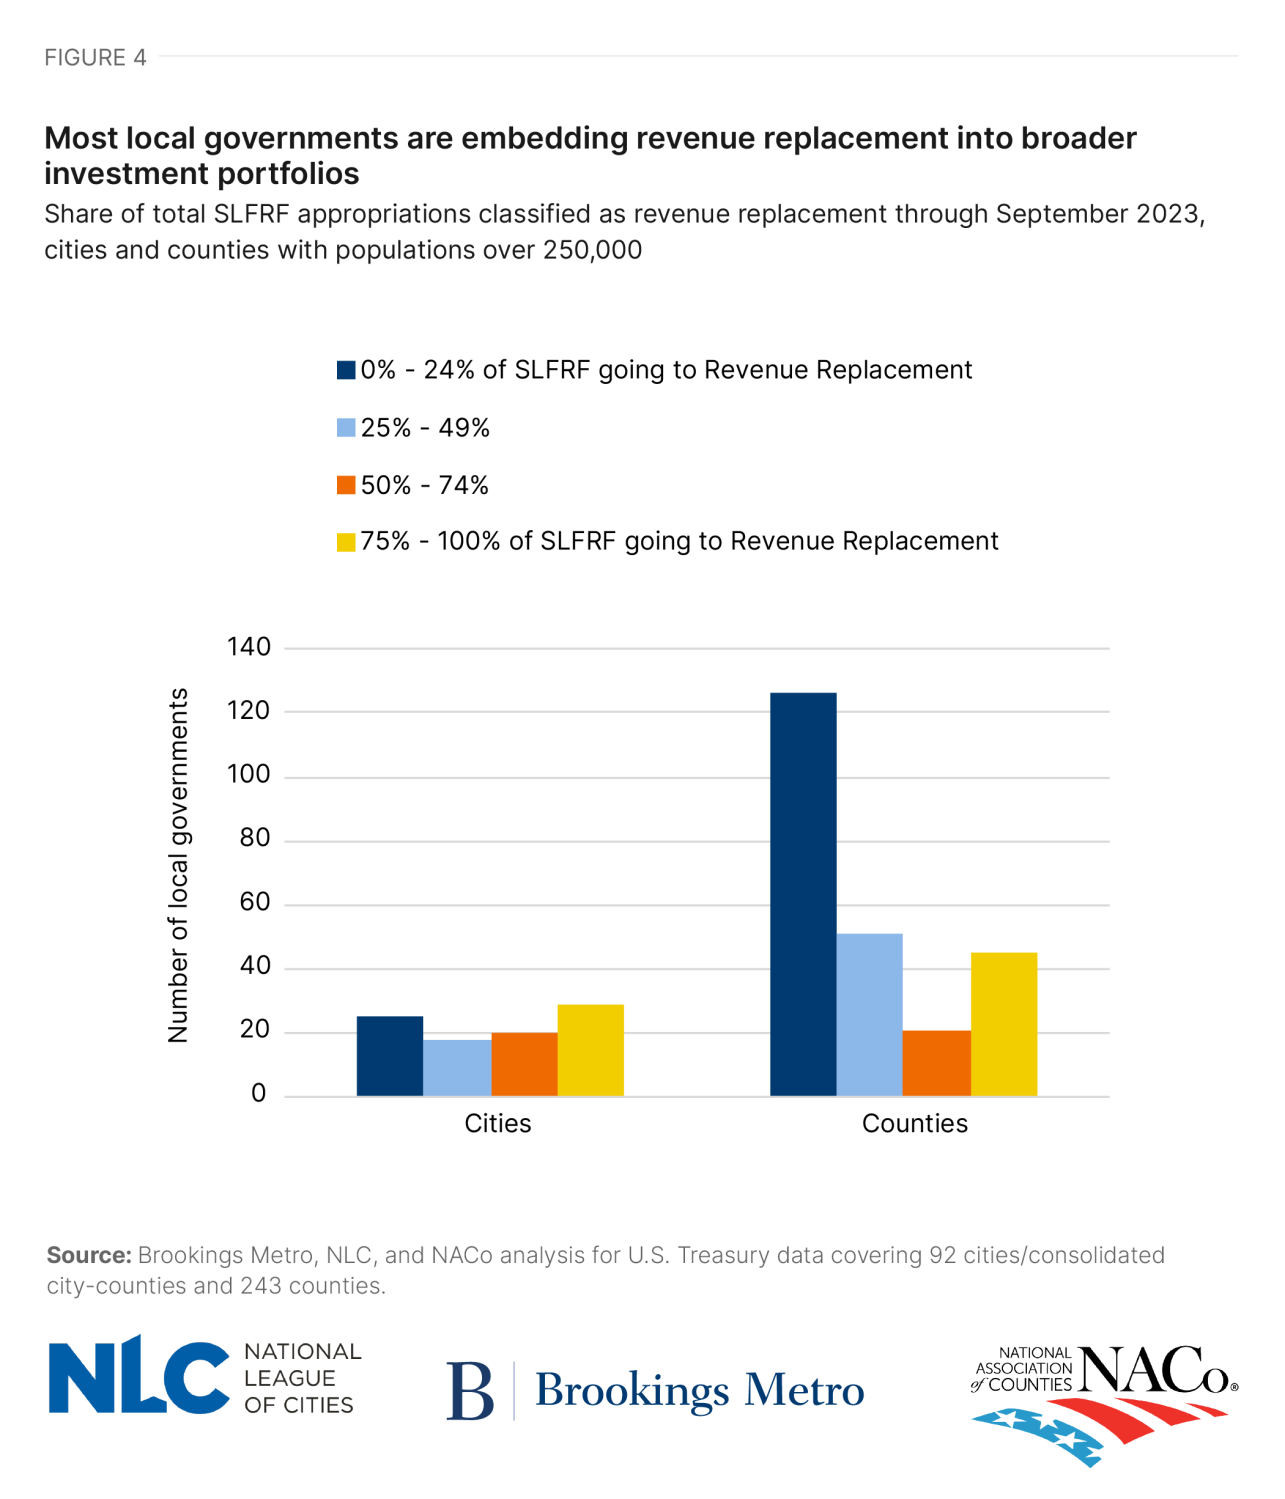 Figure 4: Most local governments are embedding revenue replacement into broader investment portfolios